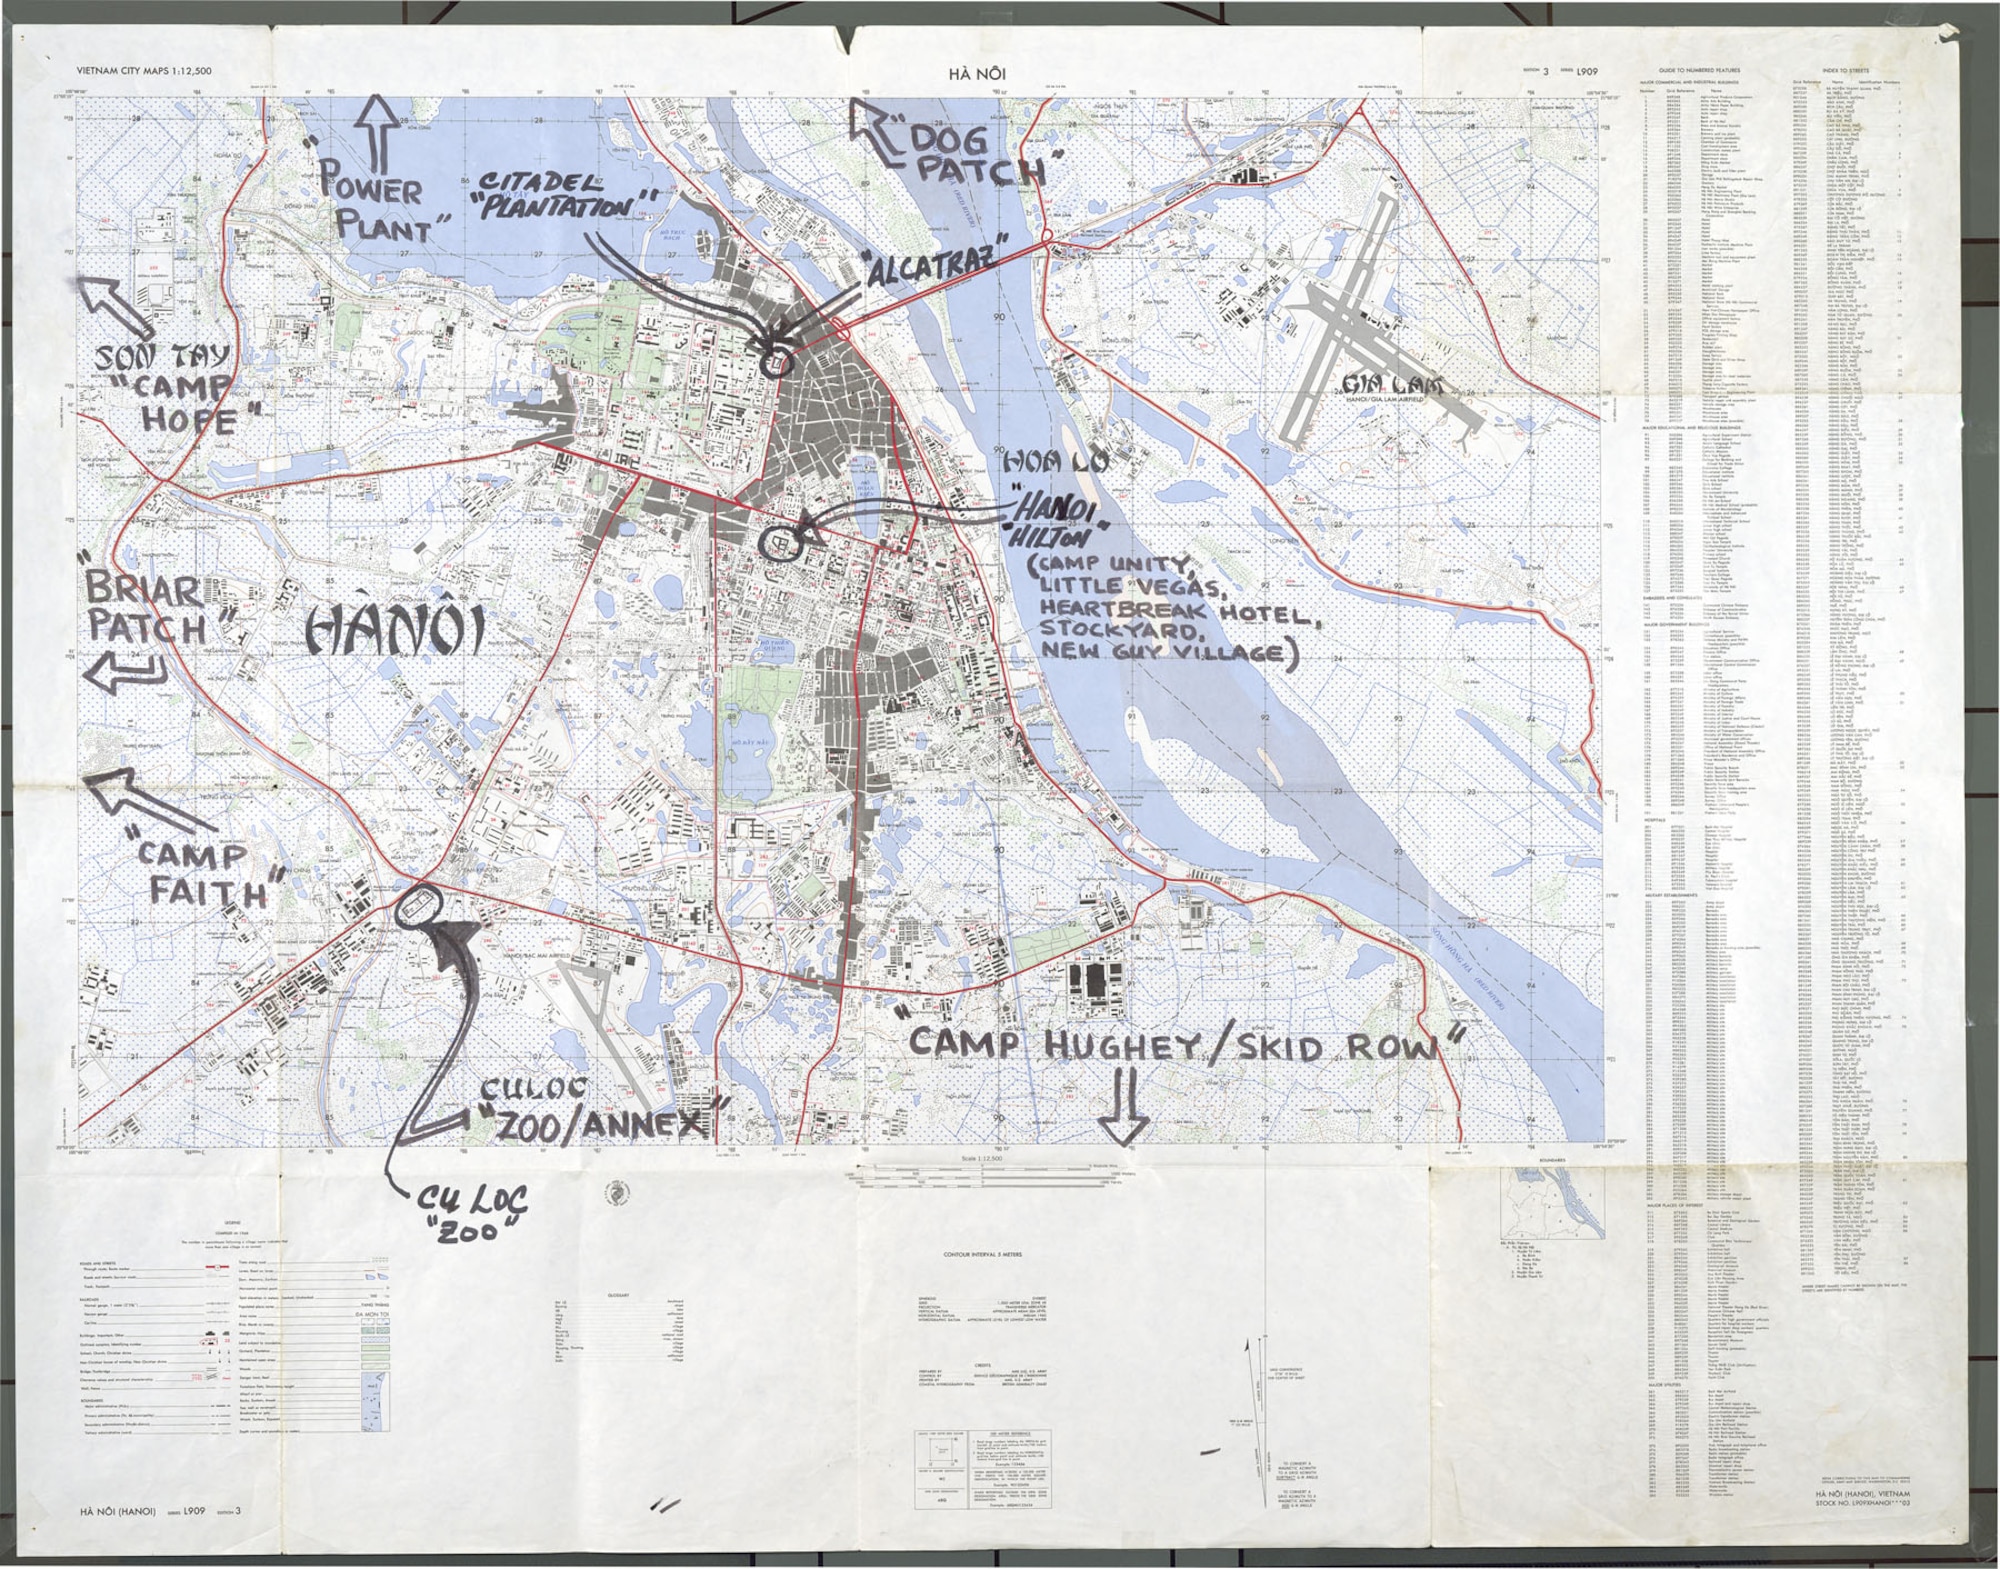 Shortly after the war, ex-POW Mike McGrath annotated this detailed map of Hanoi to show the location of prisons. He did it so he would not forget where the camps were. McGrath also made drawings of his captivity, several of which appear in this exhibit. (U.S. Air Force photo)